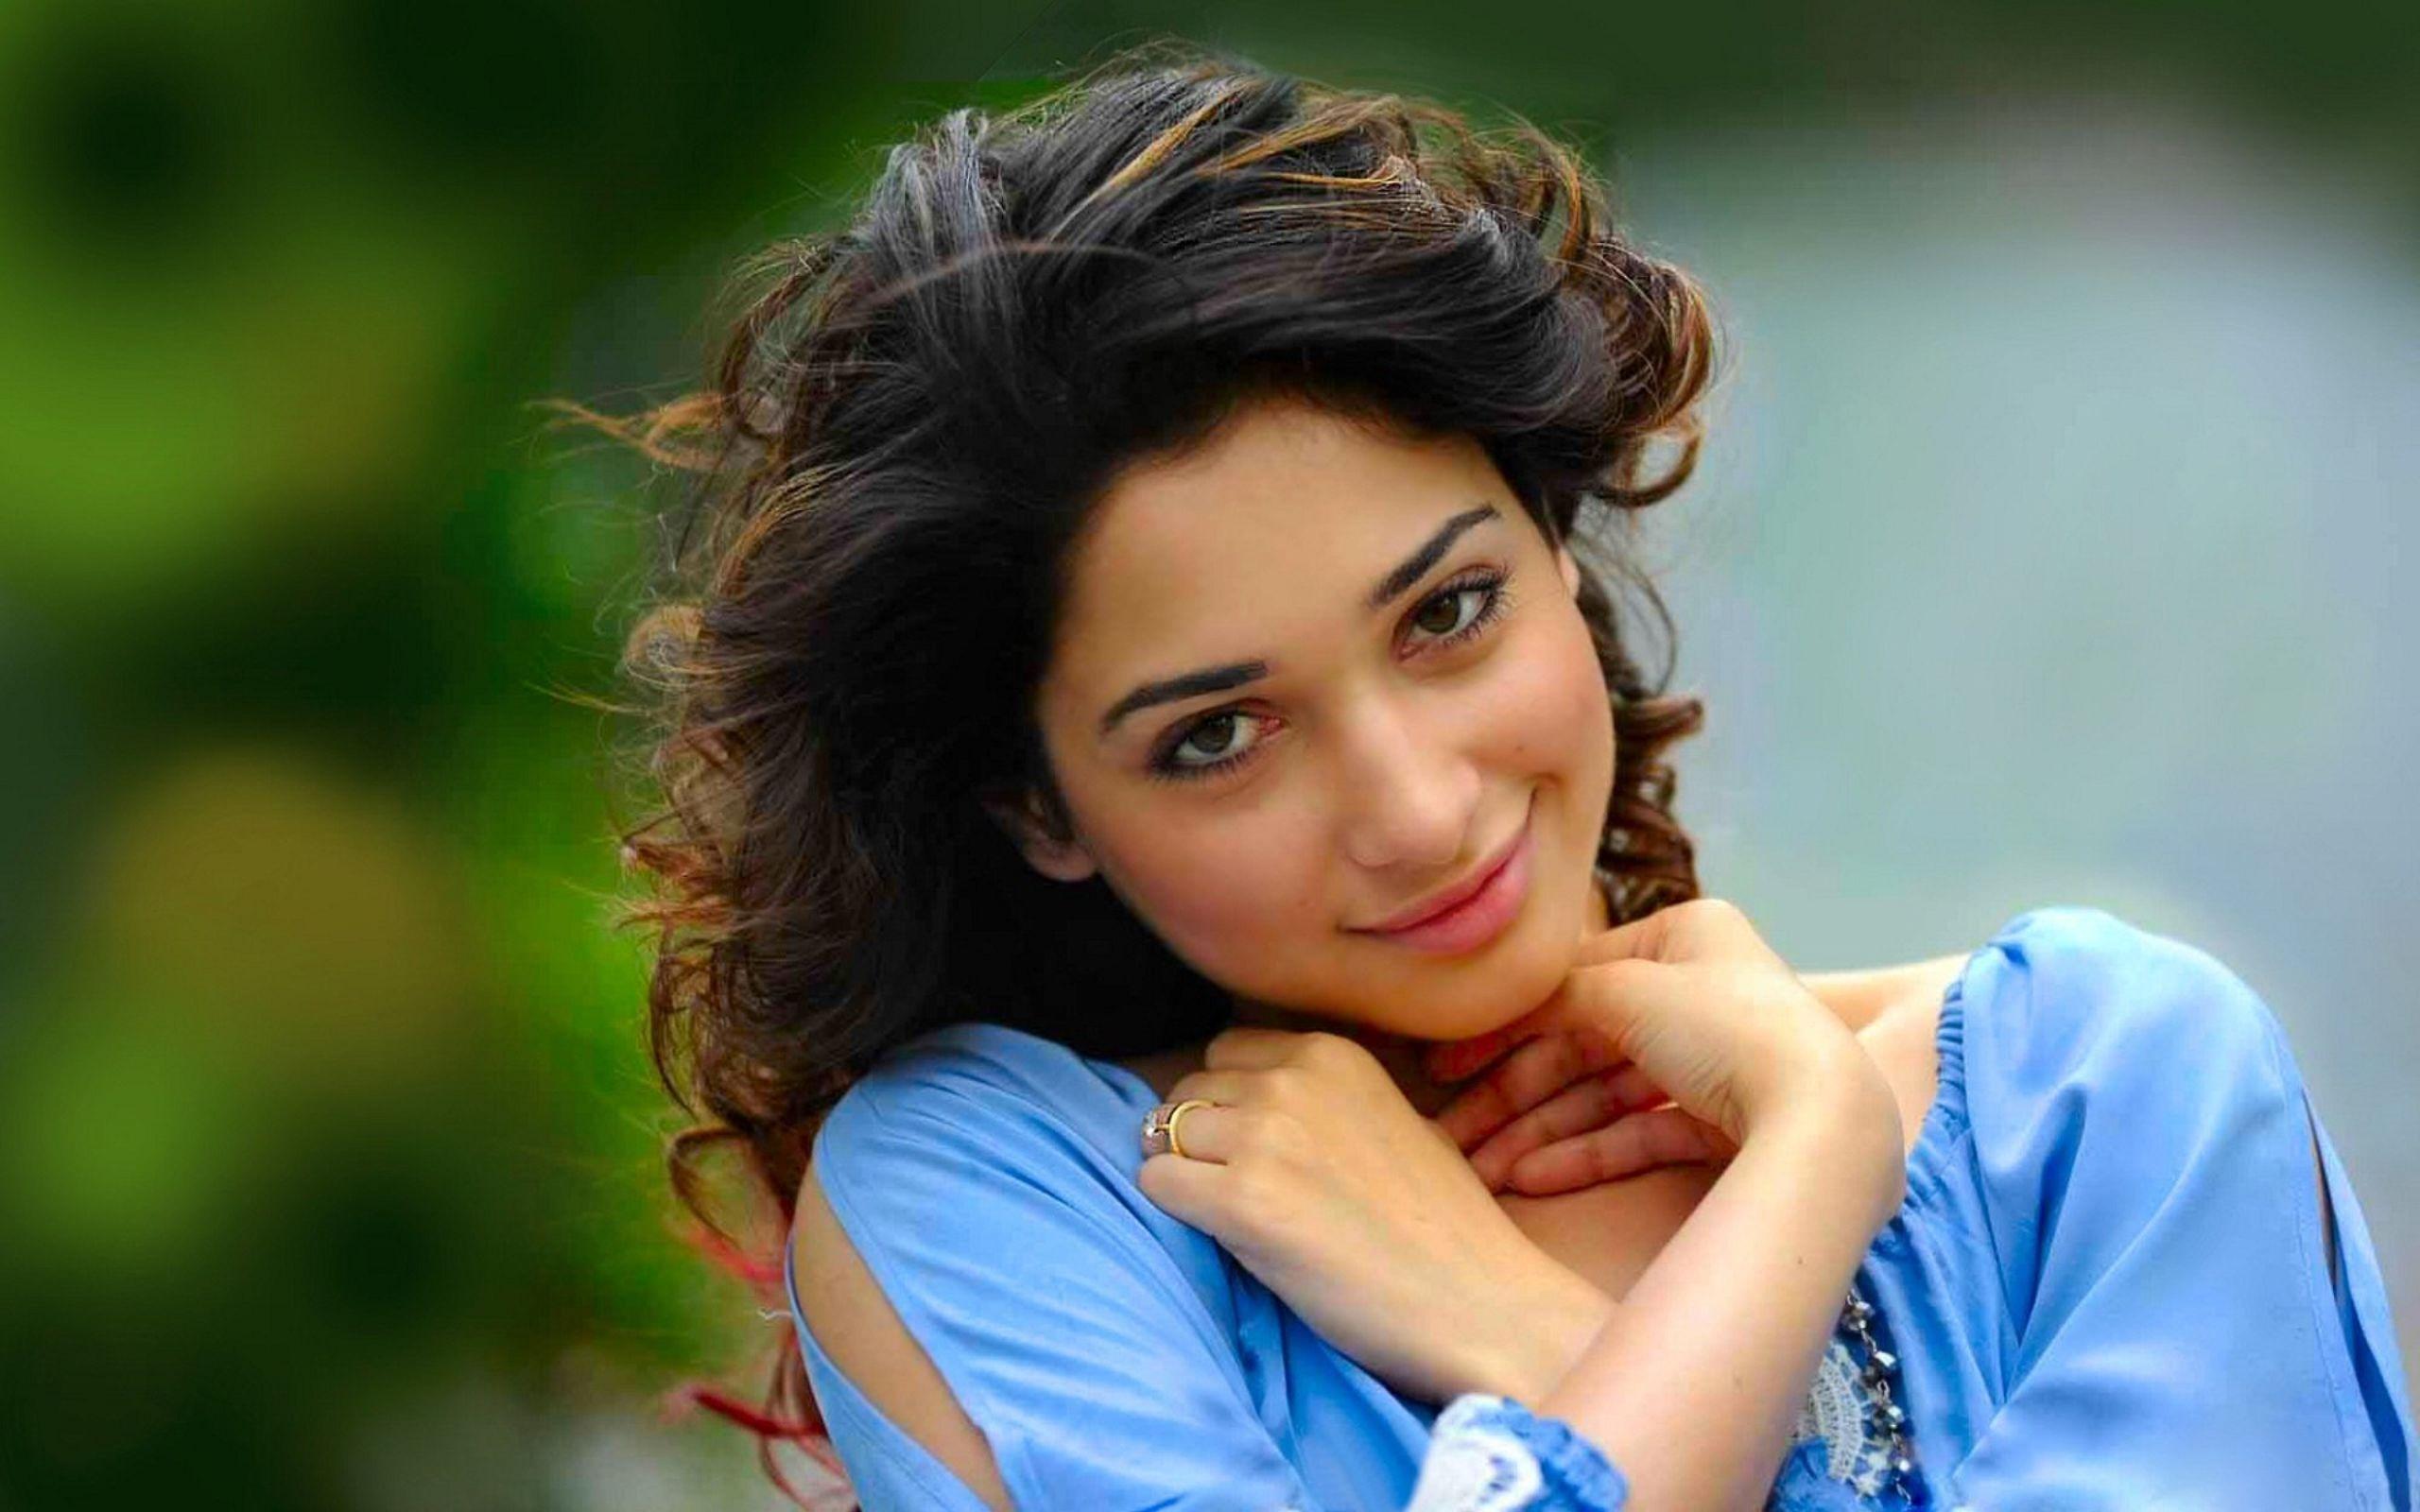 Tamanna Bhatia Cute Picture 1080p wallpaper background